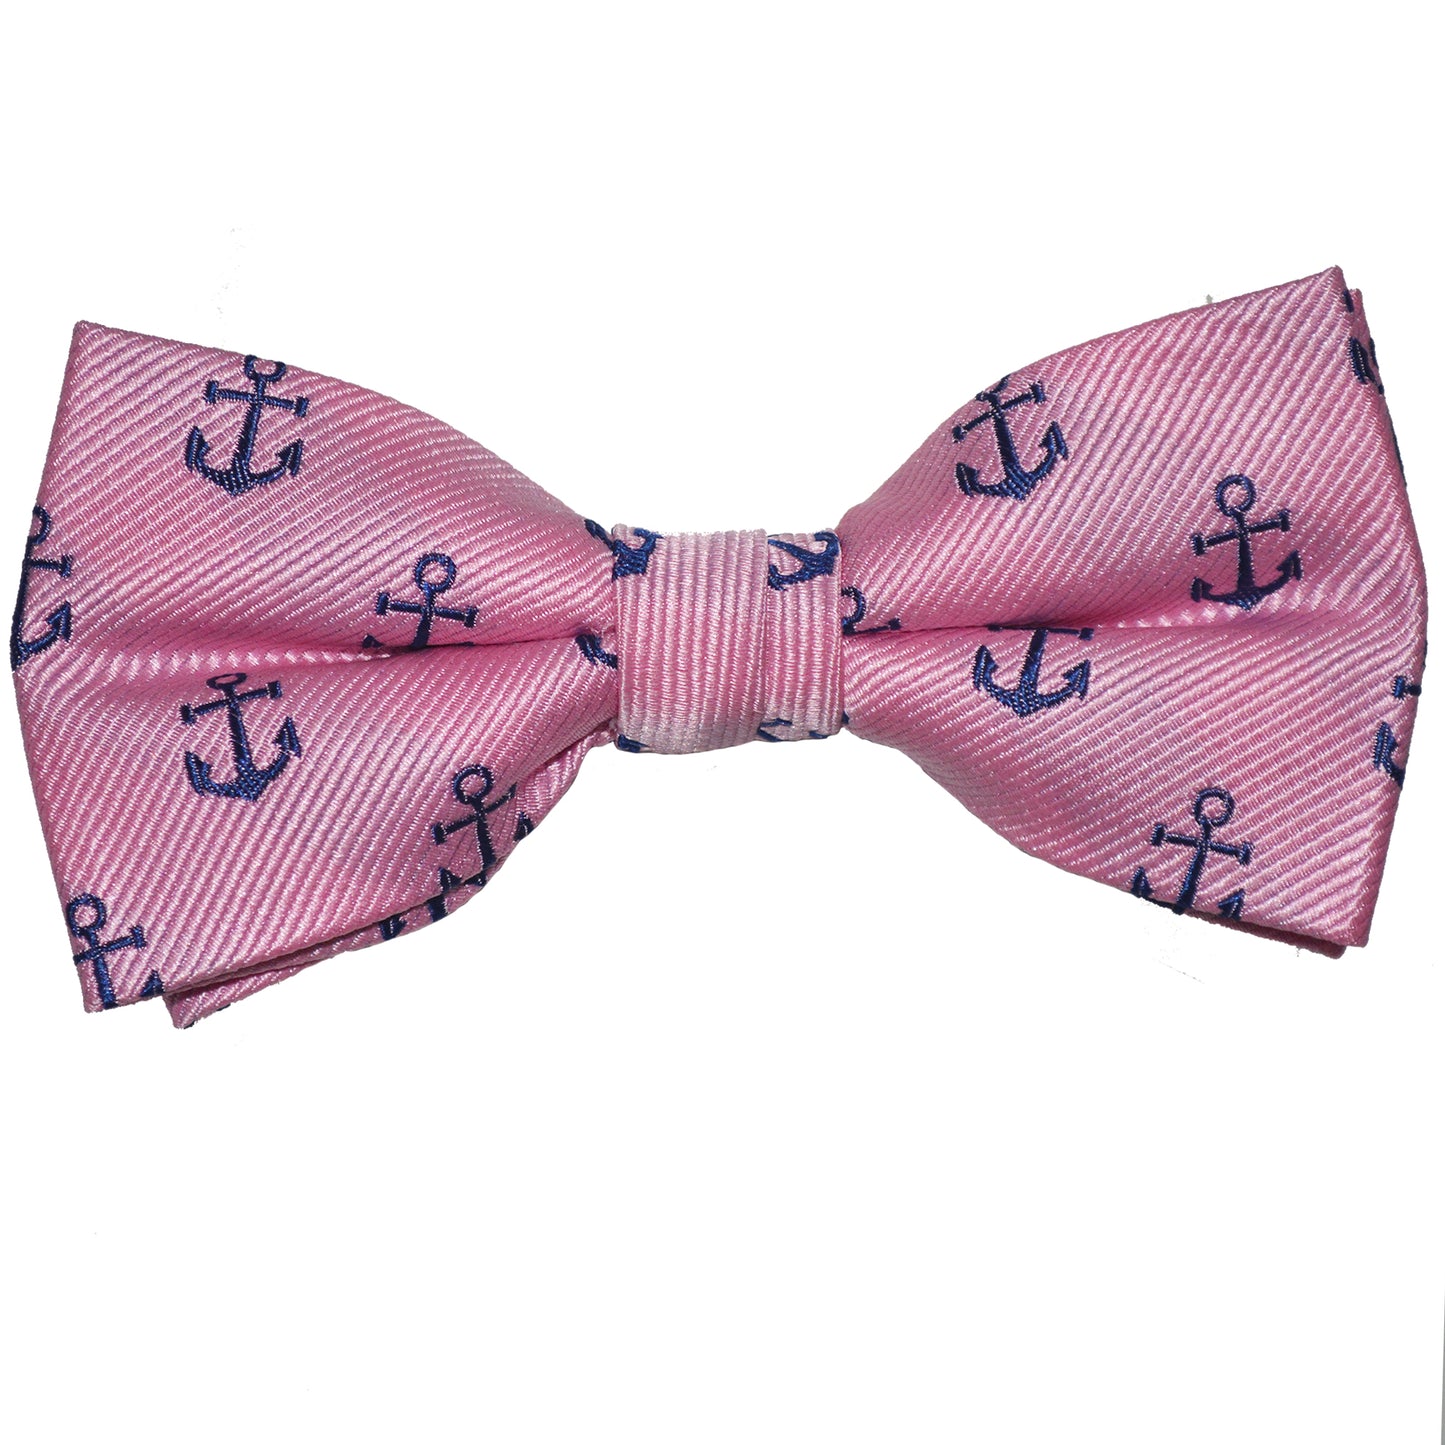 Anchor Bow Tie - Navy on Pink, Woven Silk, Pre-Tied for Kids - SummerTies